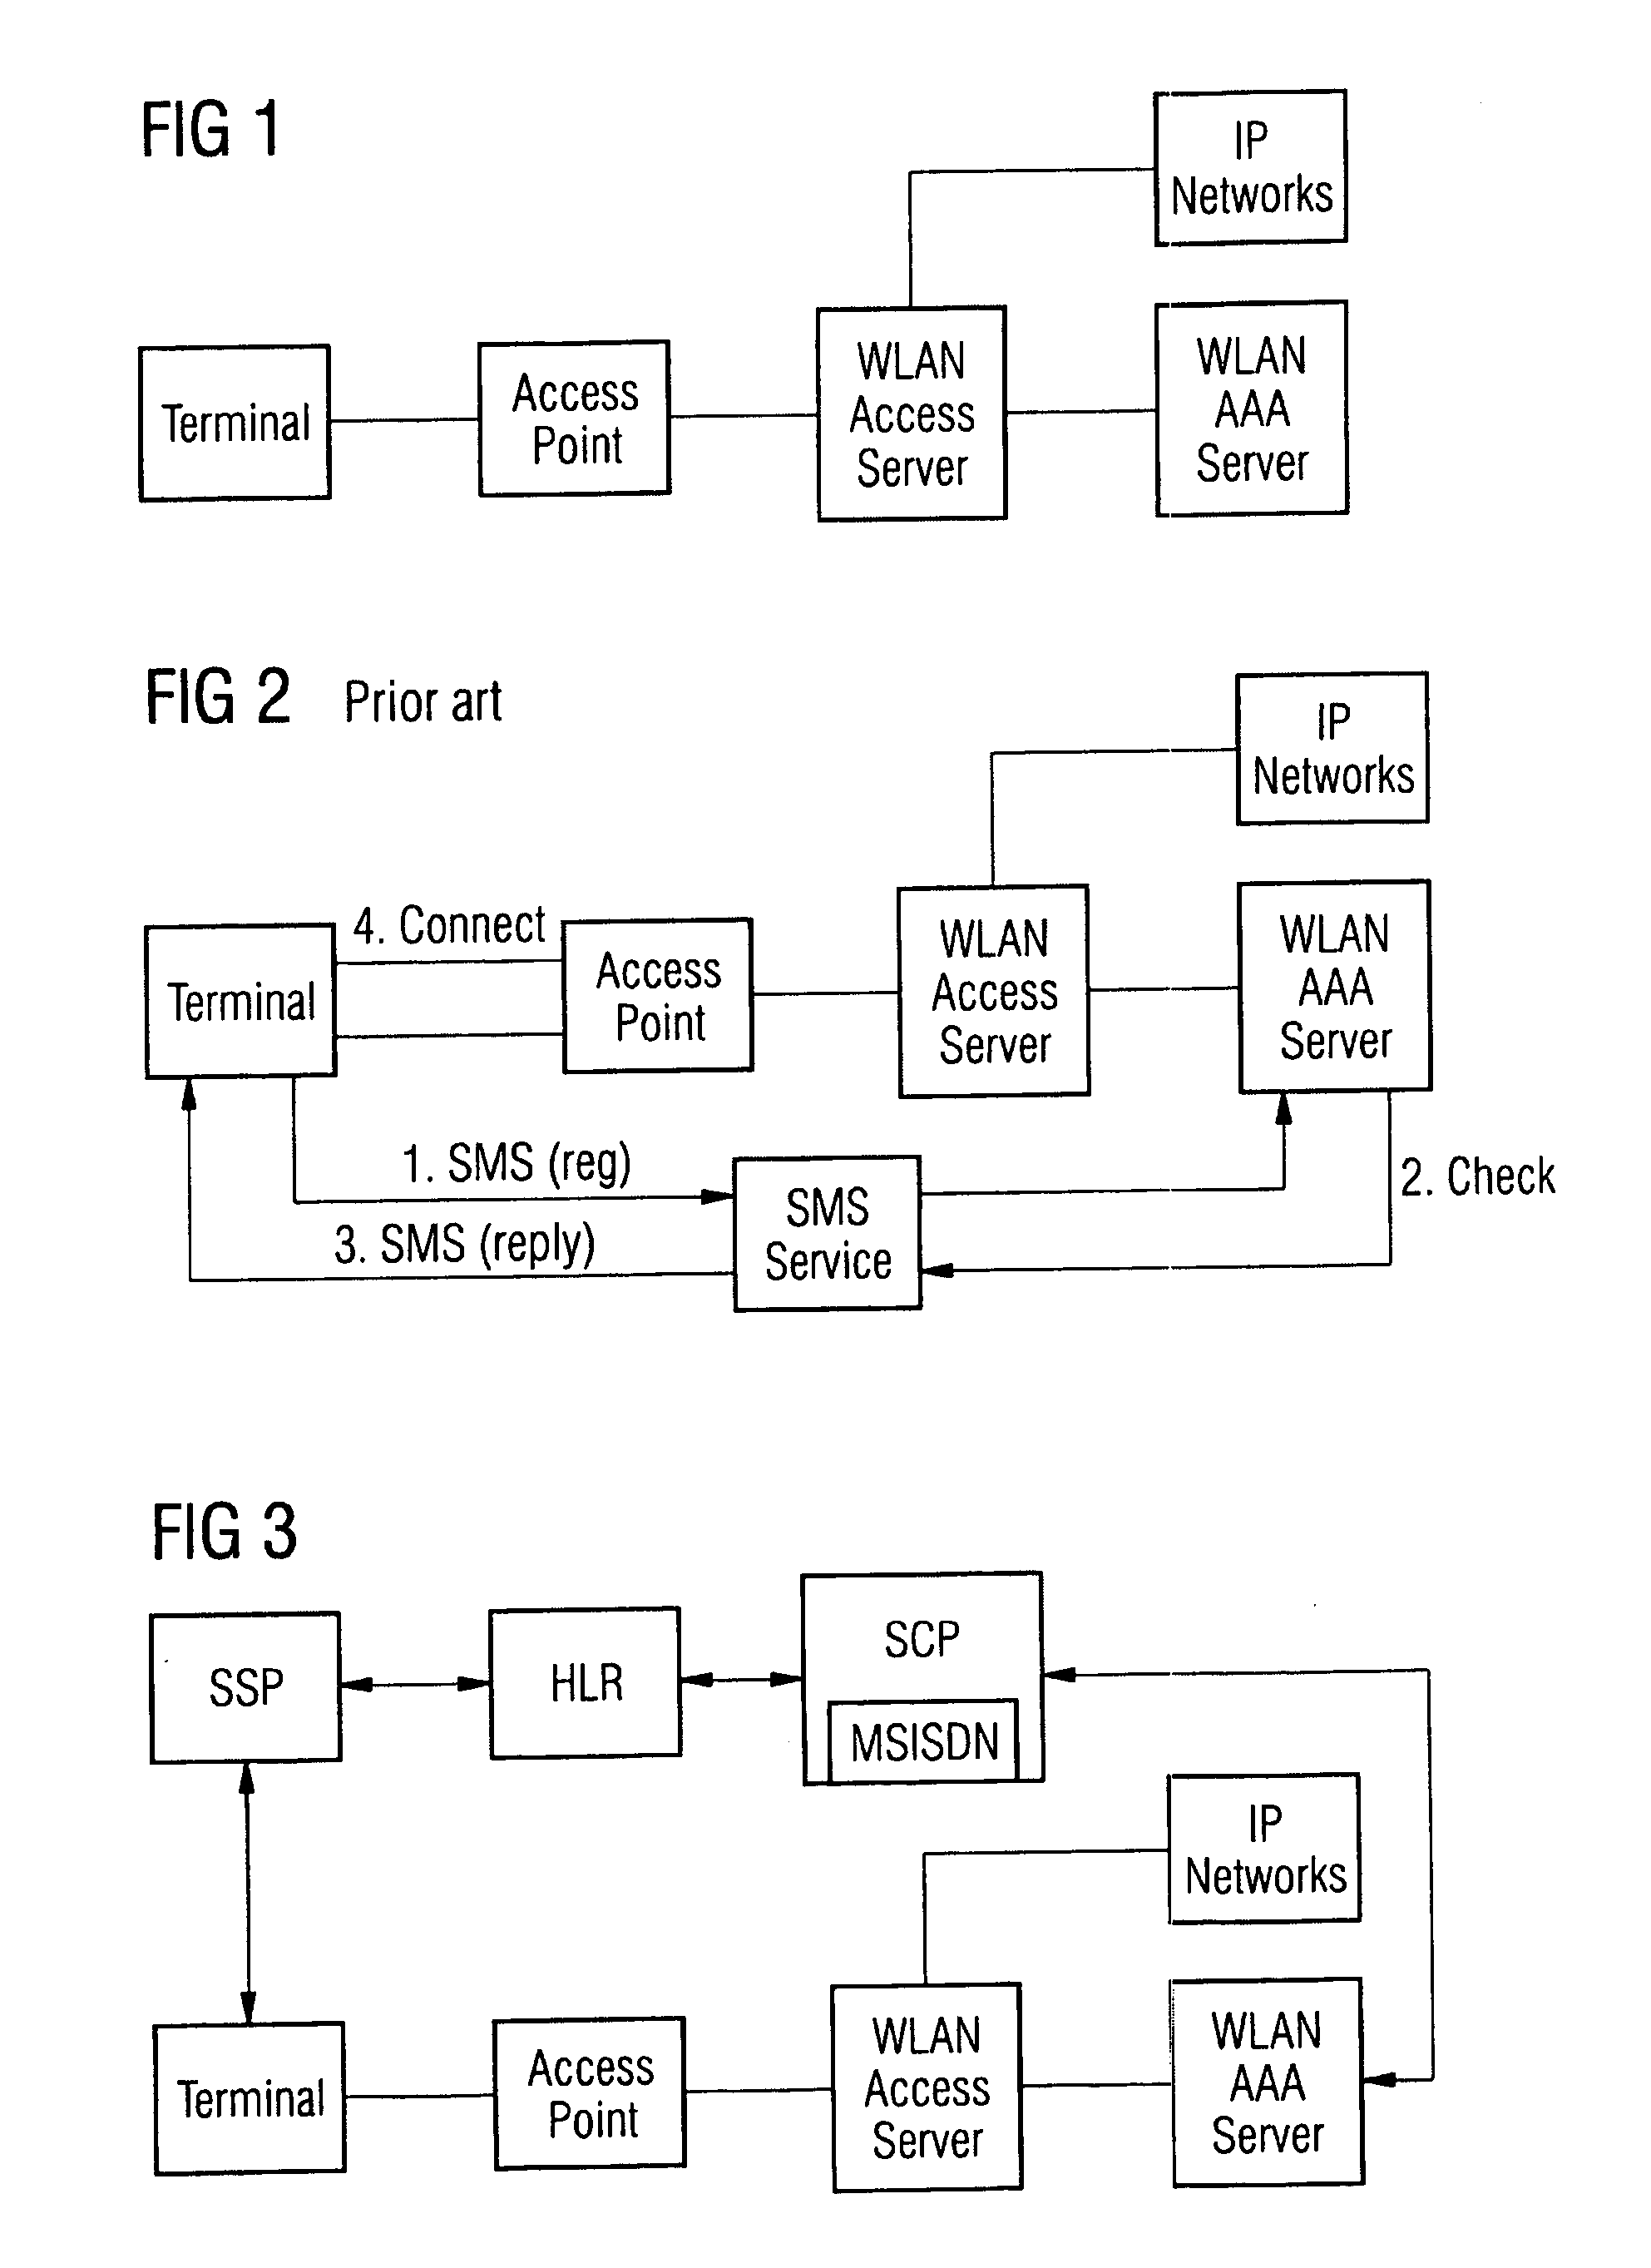 Method for authenticating a user for the purposes of establishing a connection from a mobile terminal to a WLAN network